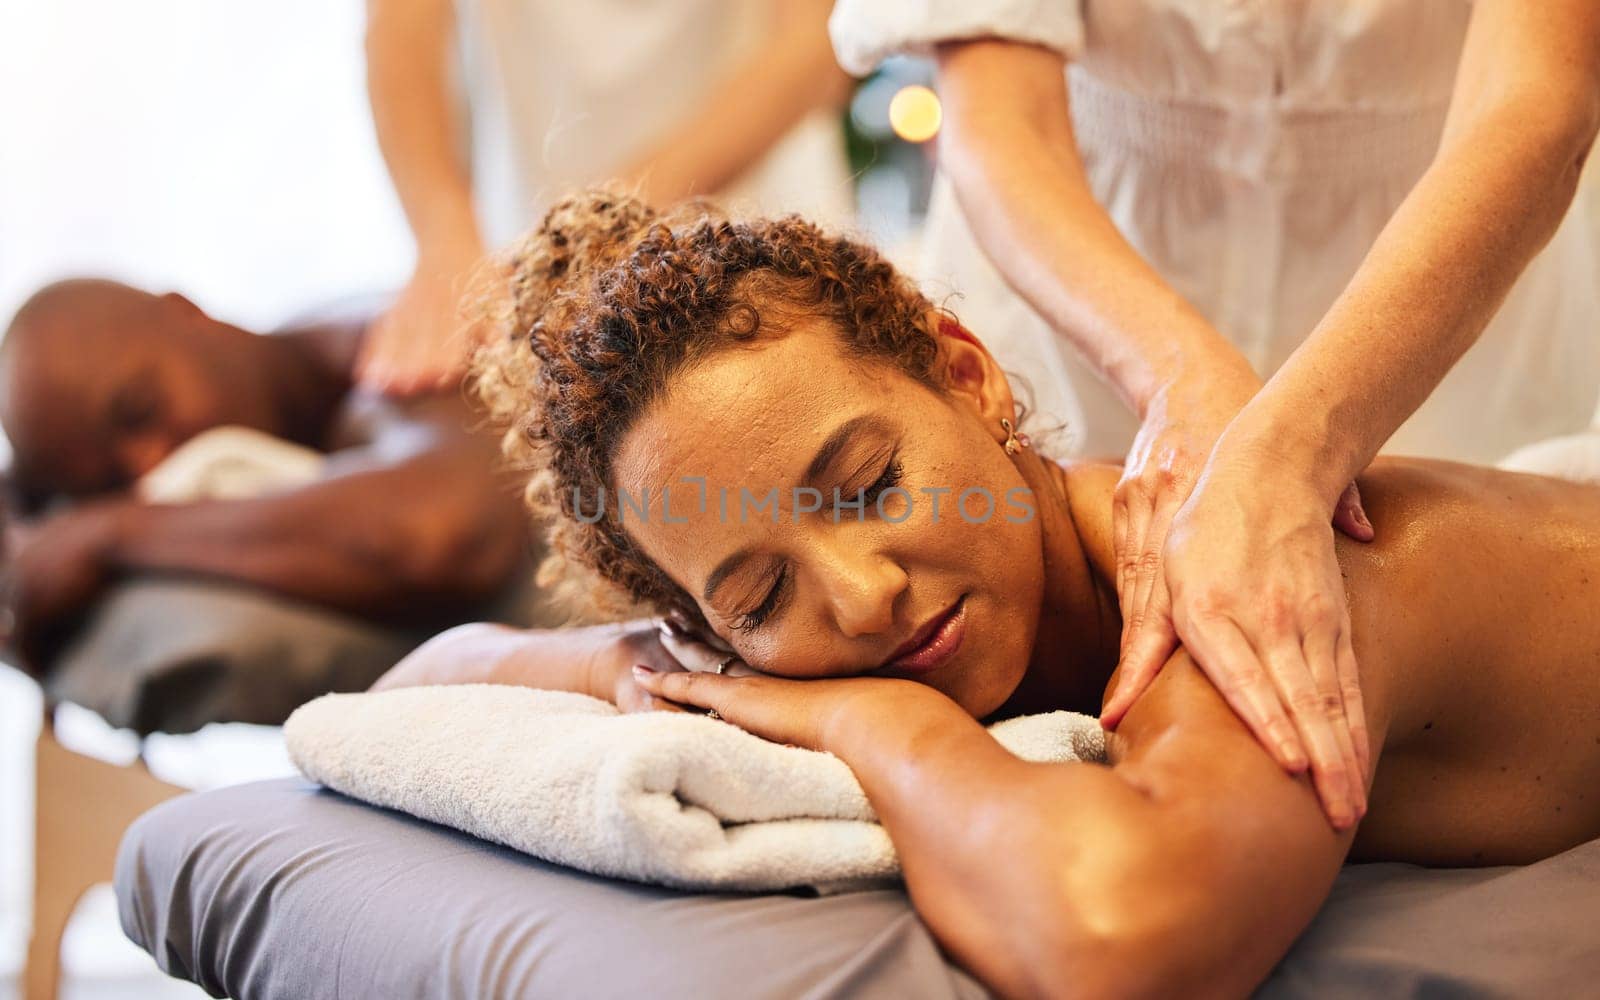 Couple massage, hands or spa therapist for relax, luxury or wellness treatment for health, lifestyle or zen at resort. Healthcare, beauty salon or black woman and man for body, skincare or therapy by YuriArcurs